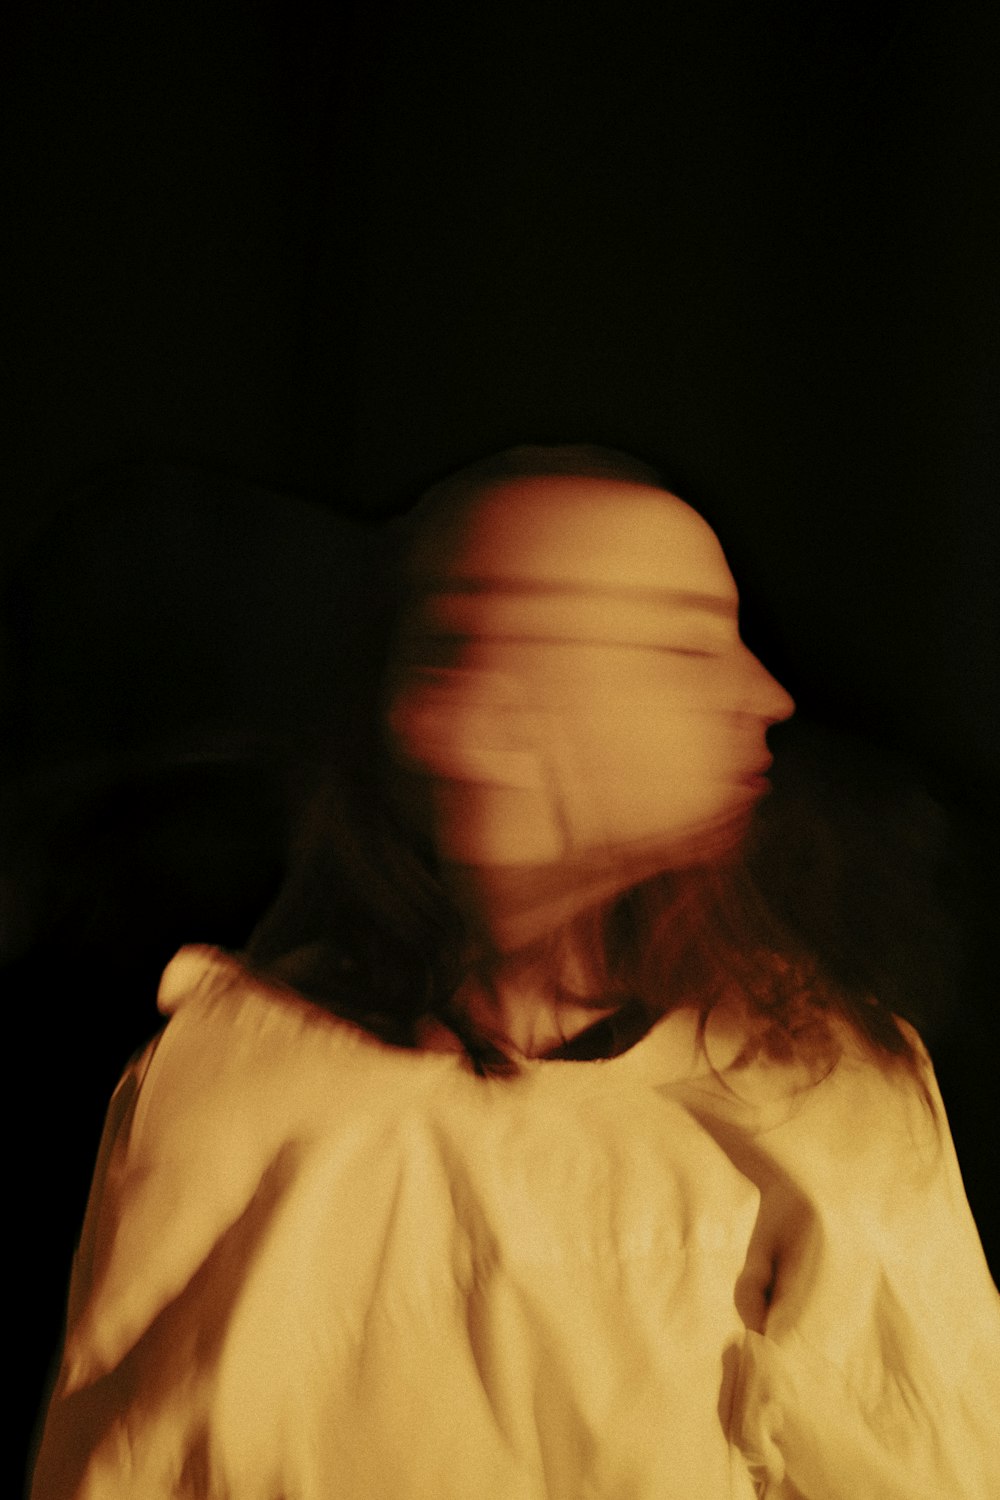 a blurry image of a person in a white shirt